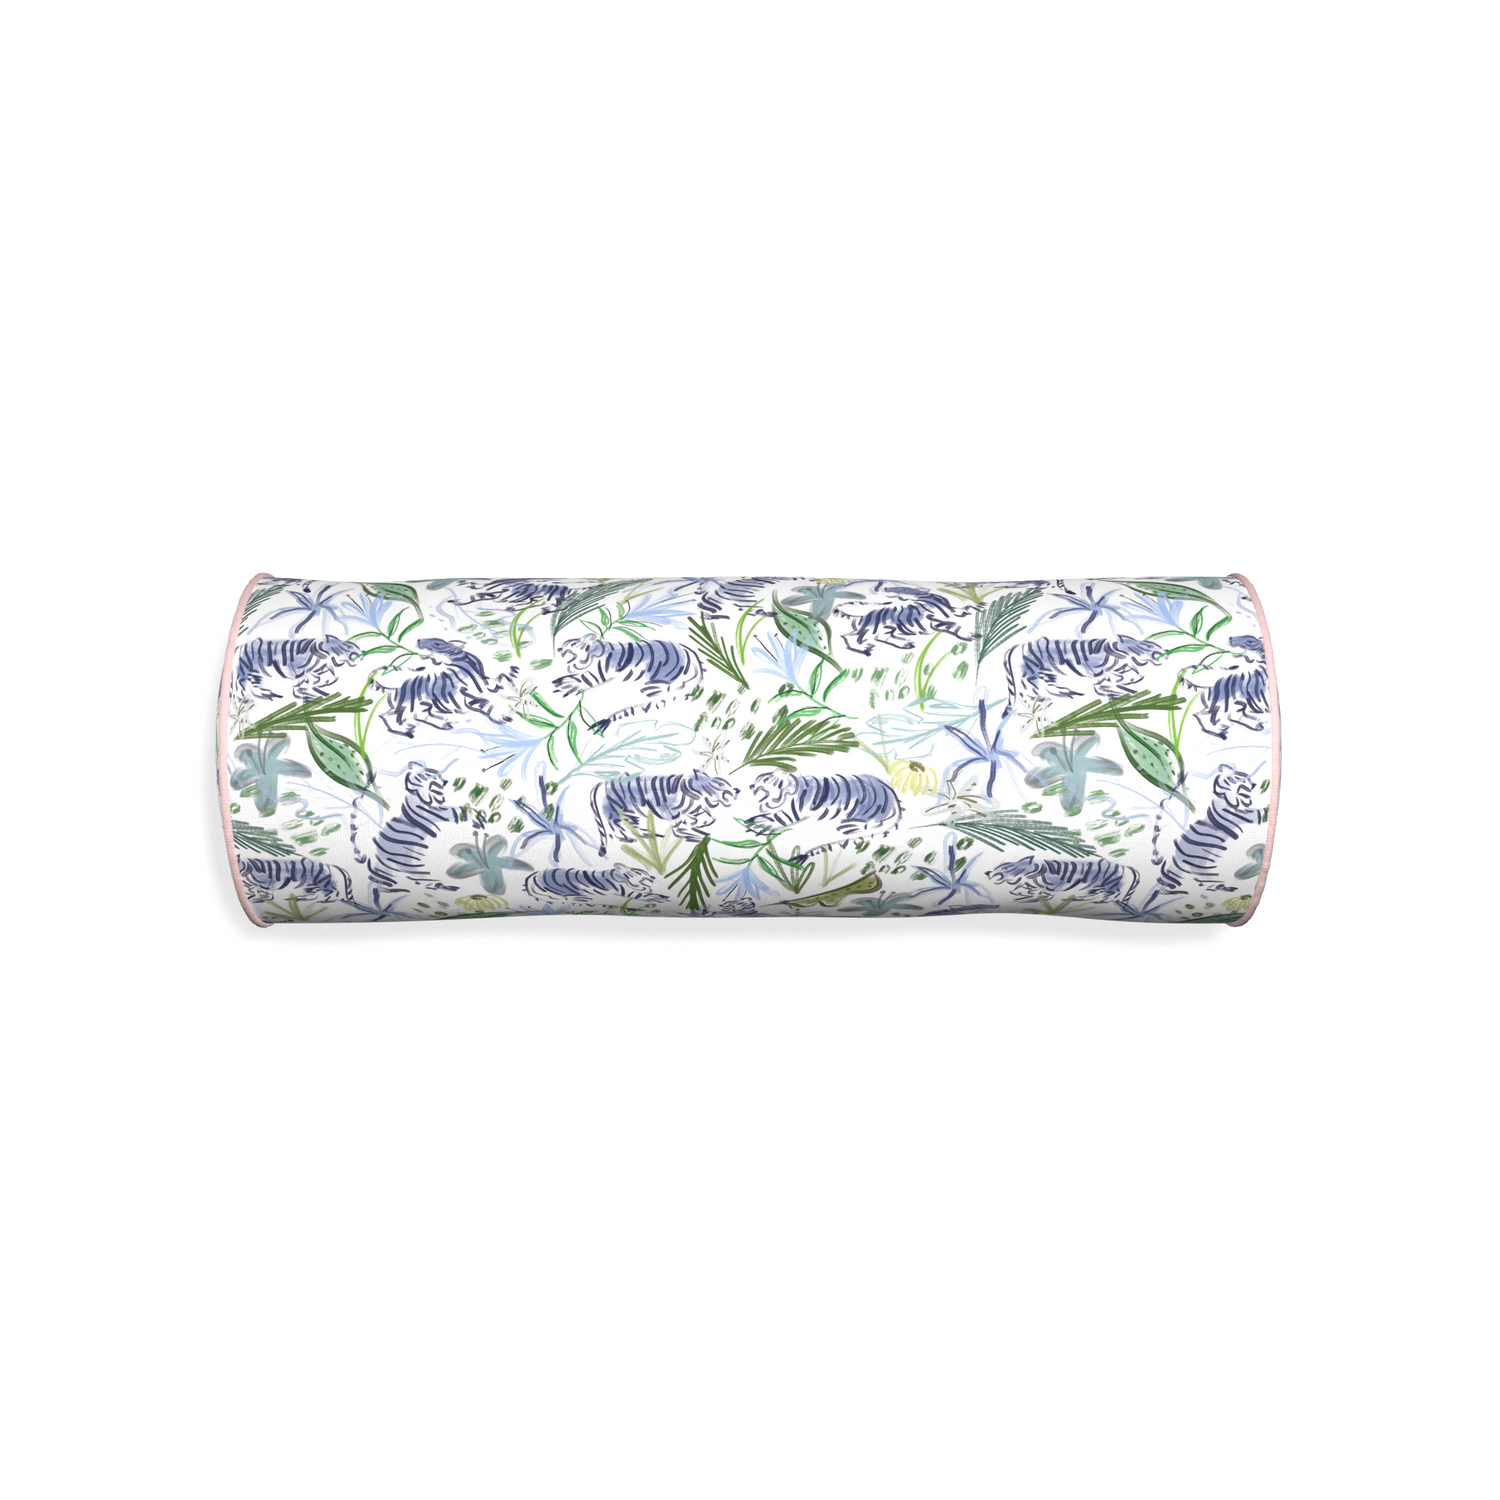 Bolster frida green custom green tigerpillow with petal piping on white background